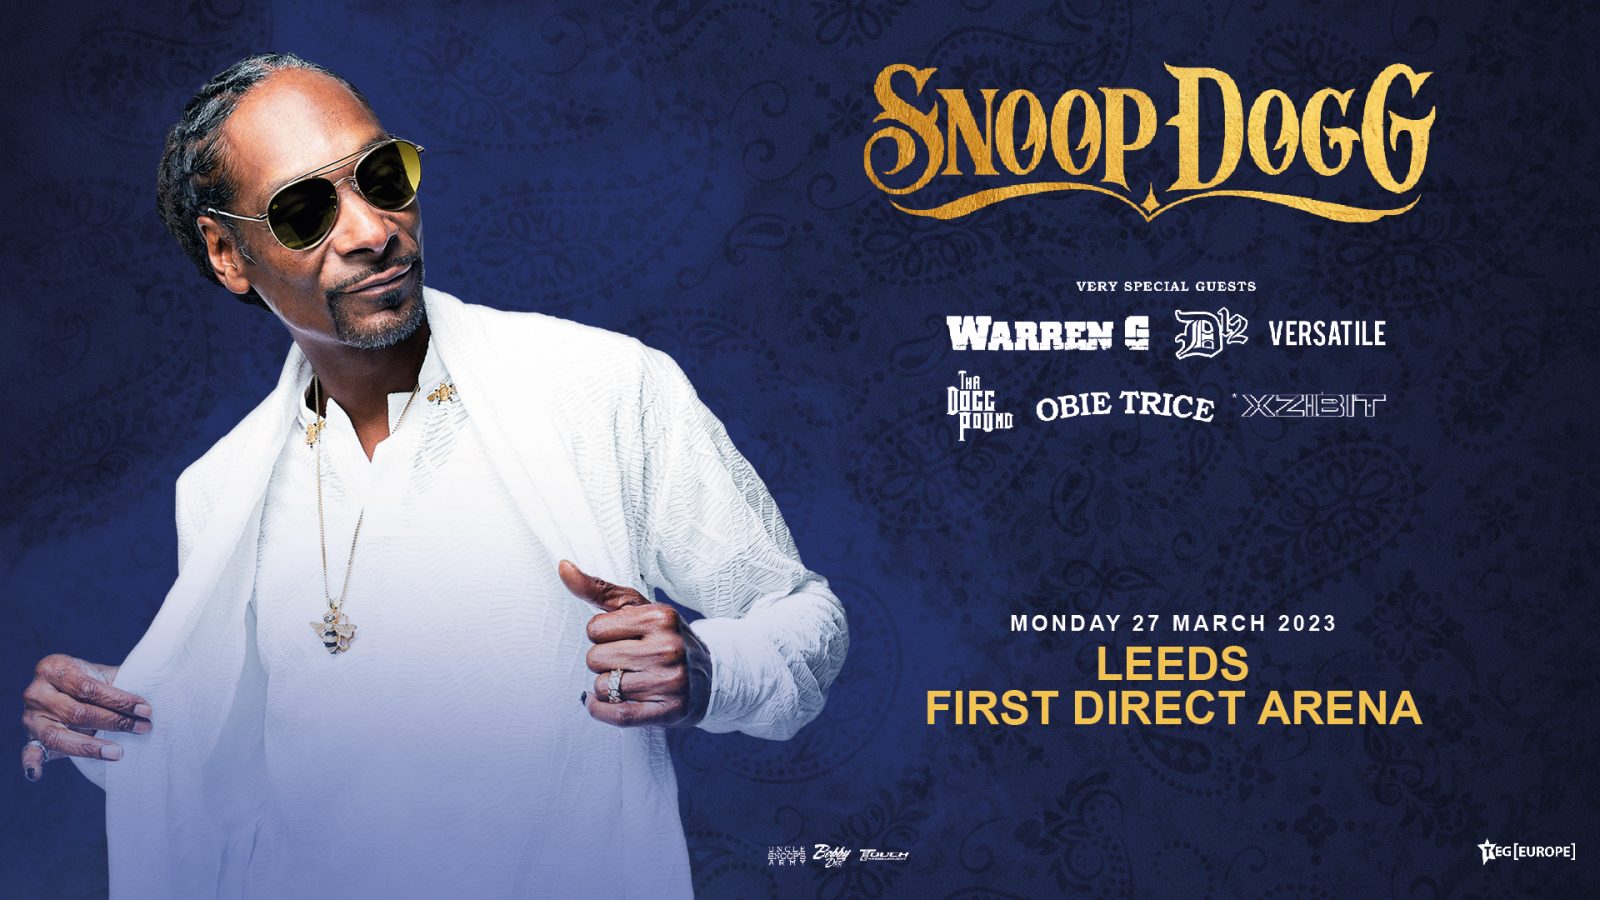 Snoop Dogg announces gig at Leeds First Direct Arena on massive UK and